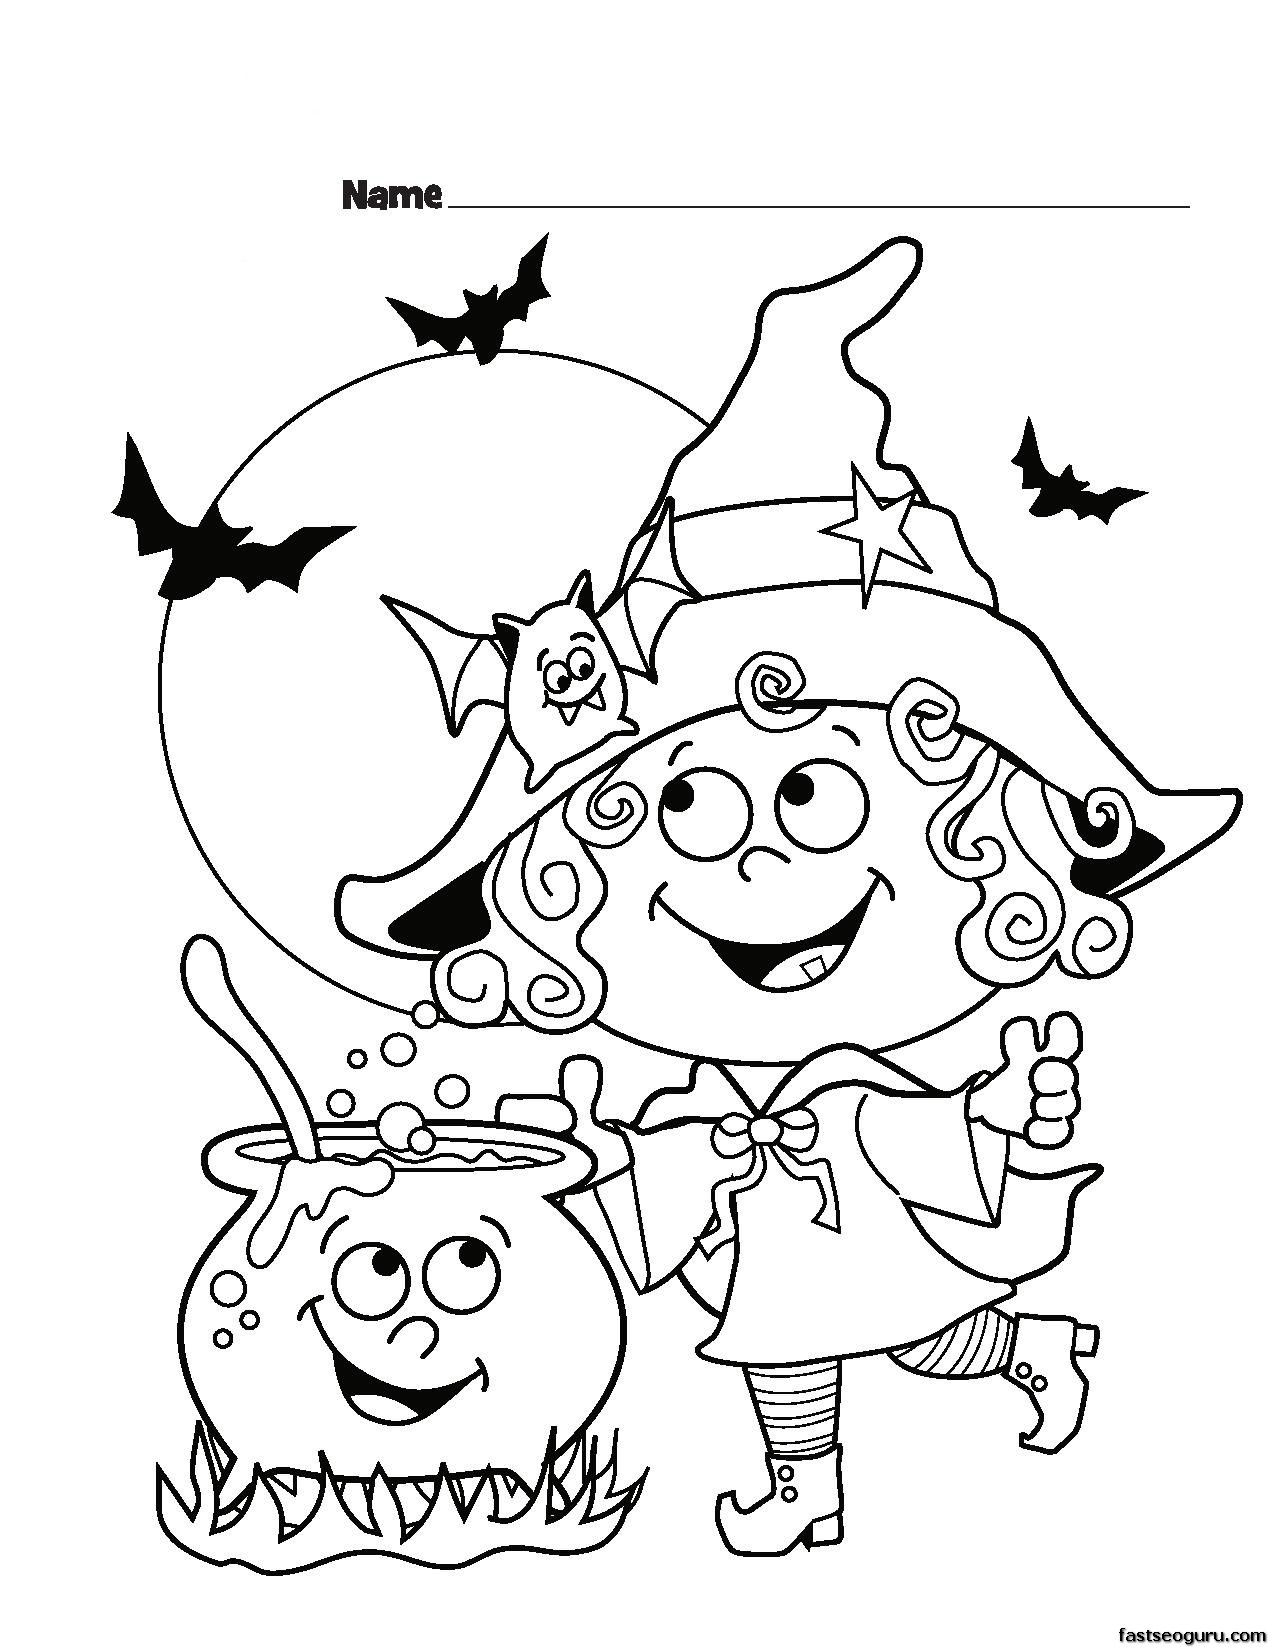 Halloween Coloring Pages For Preschoolers - Free Large